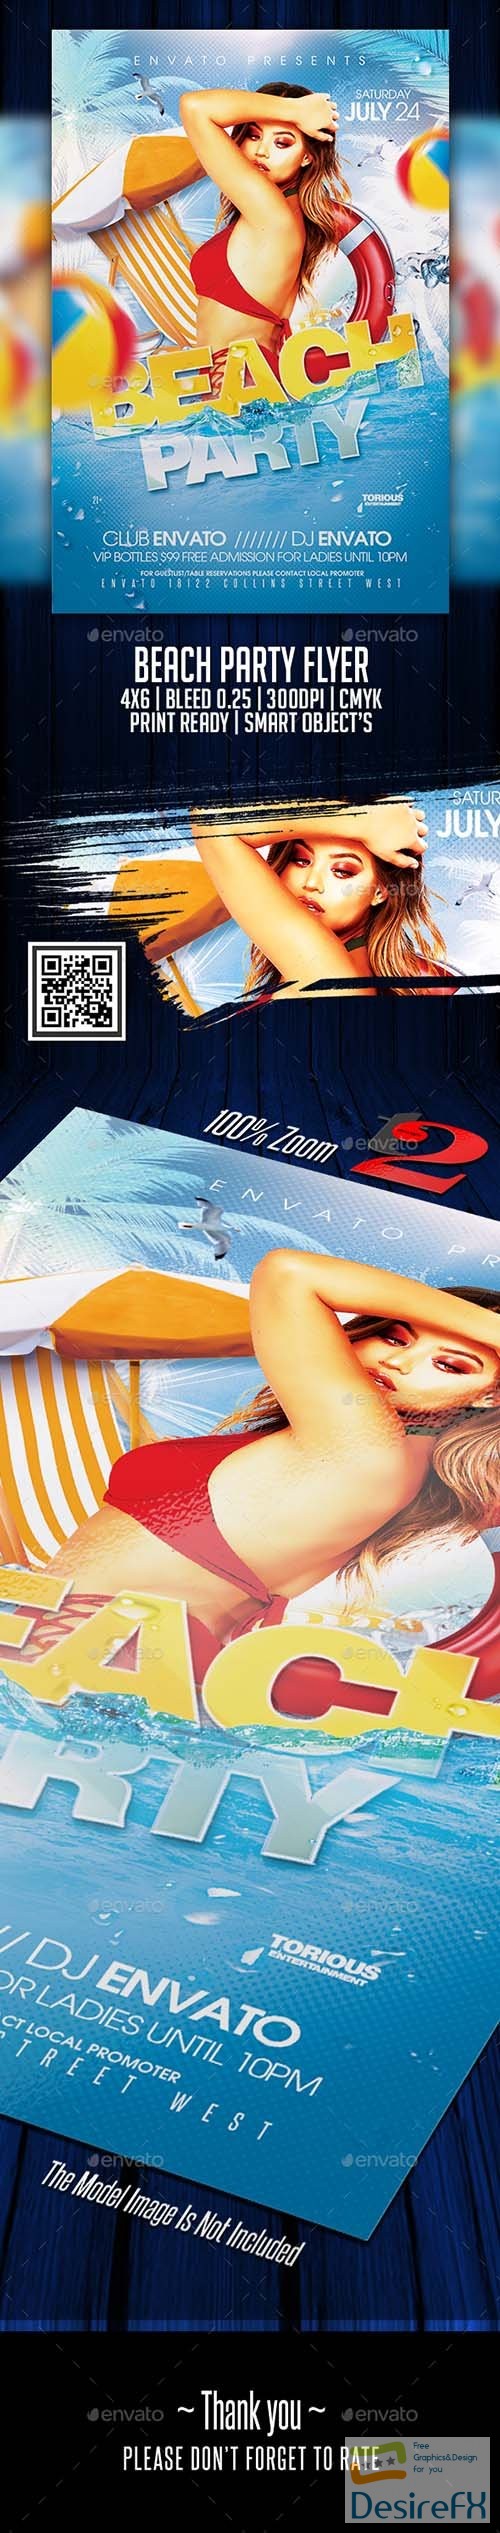 Beach Party Flyer Template 22193526